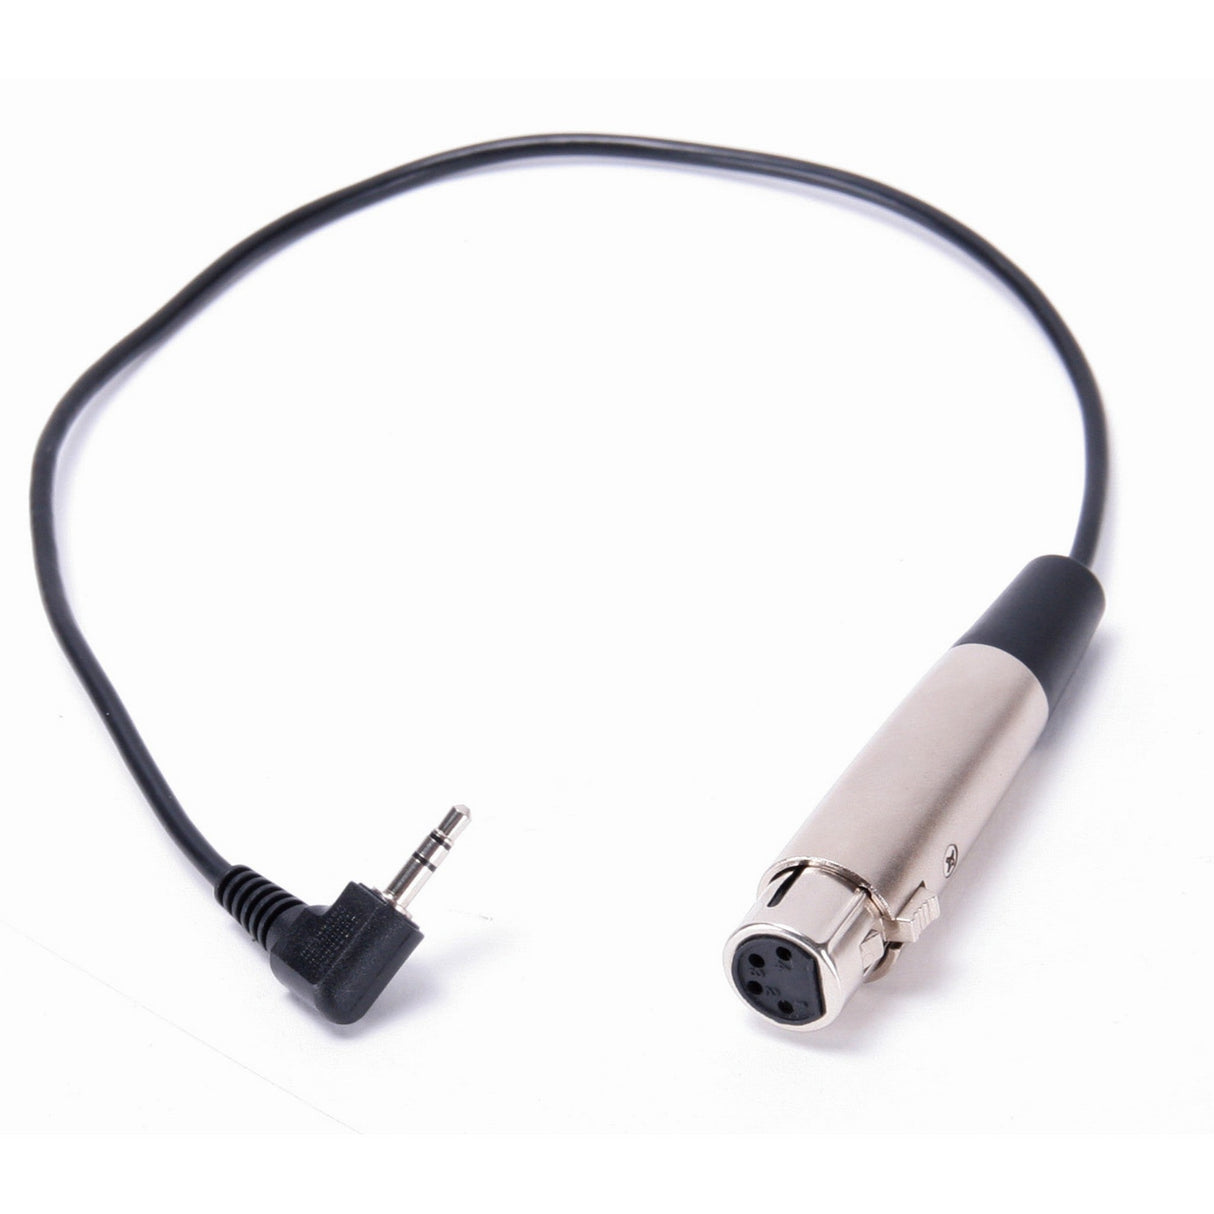 Datavideo CB-8 Adapter Cable for ITC-100SL Beltpack